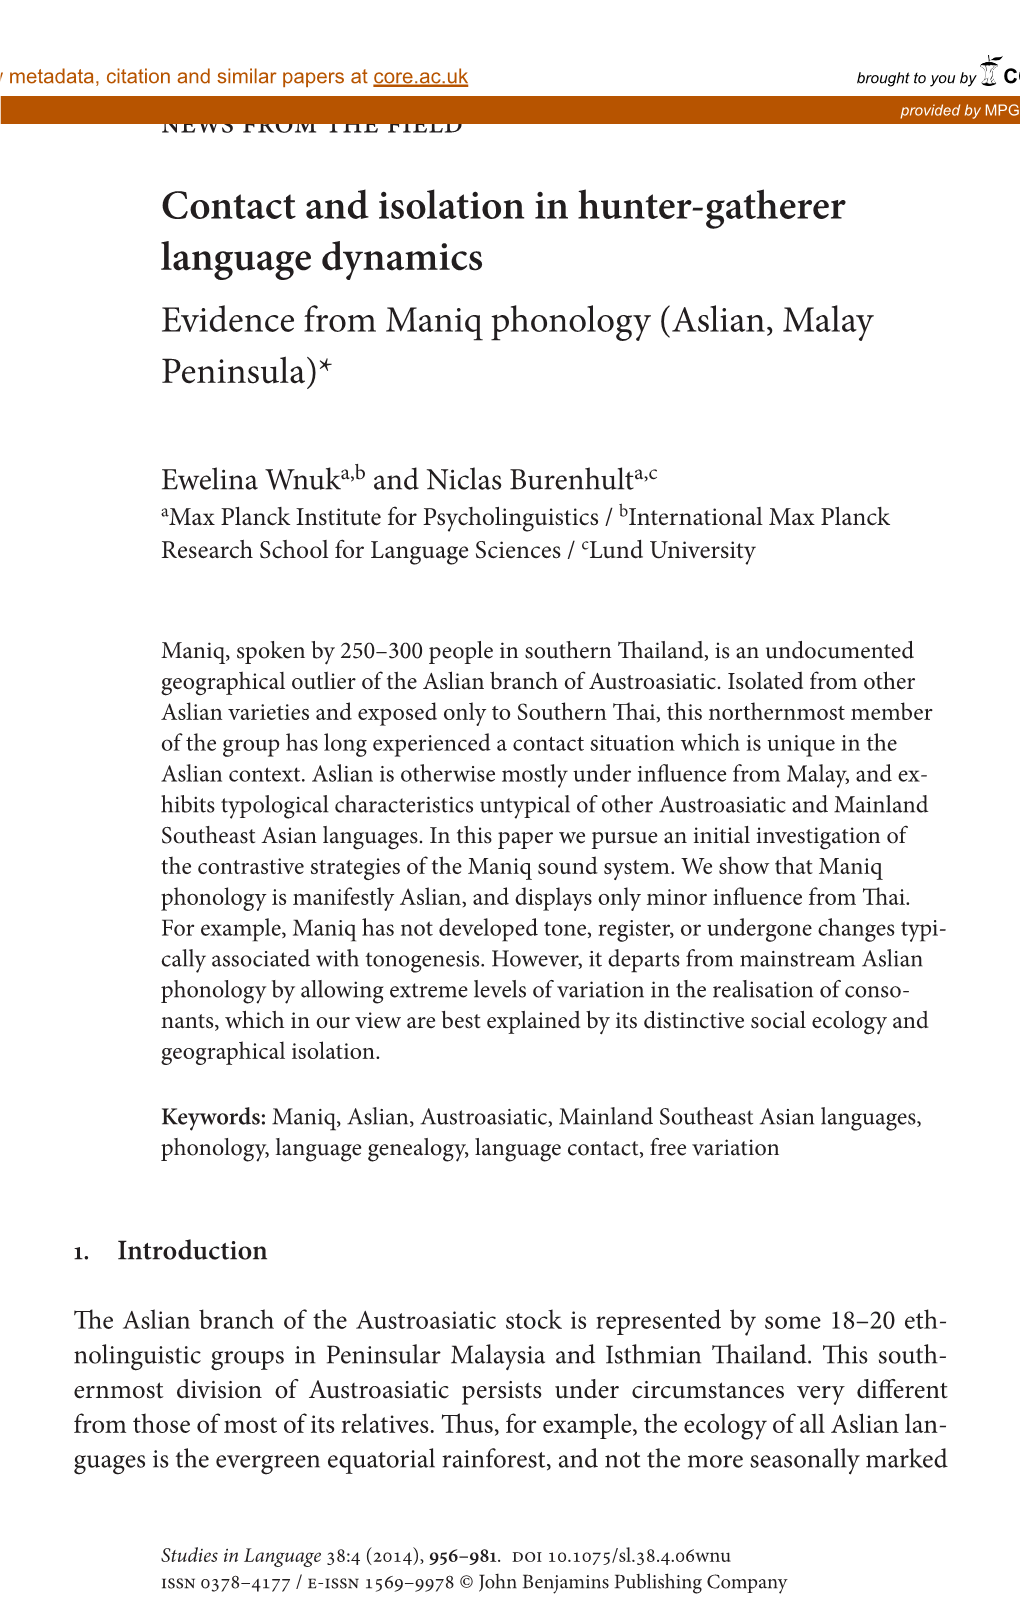 Contact and Isolation in Hunter-Gatherer Language Dynamics Evidence from Maniq Phonology (Aslian, Malay Peninsula)*